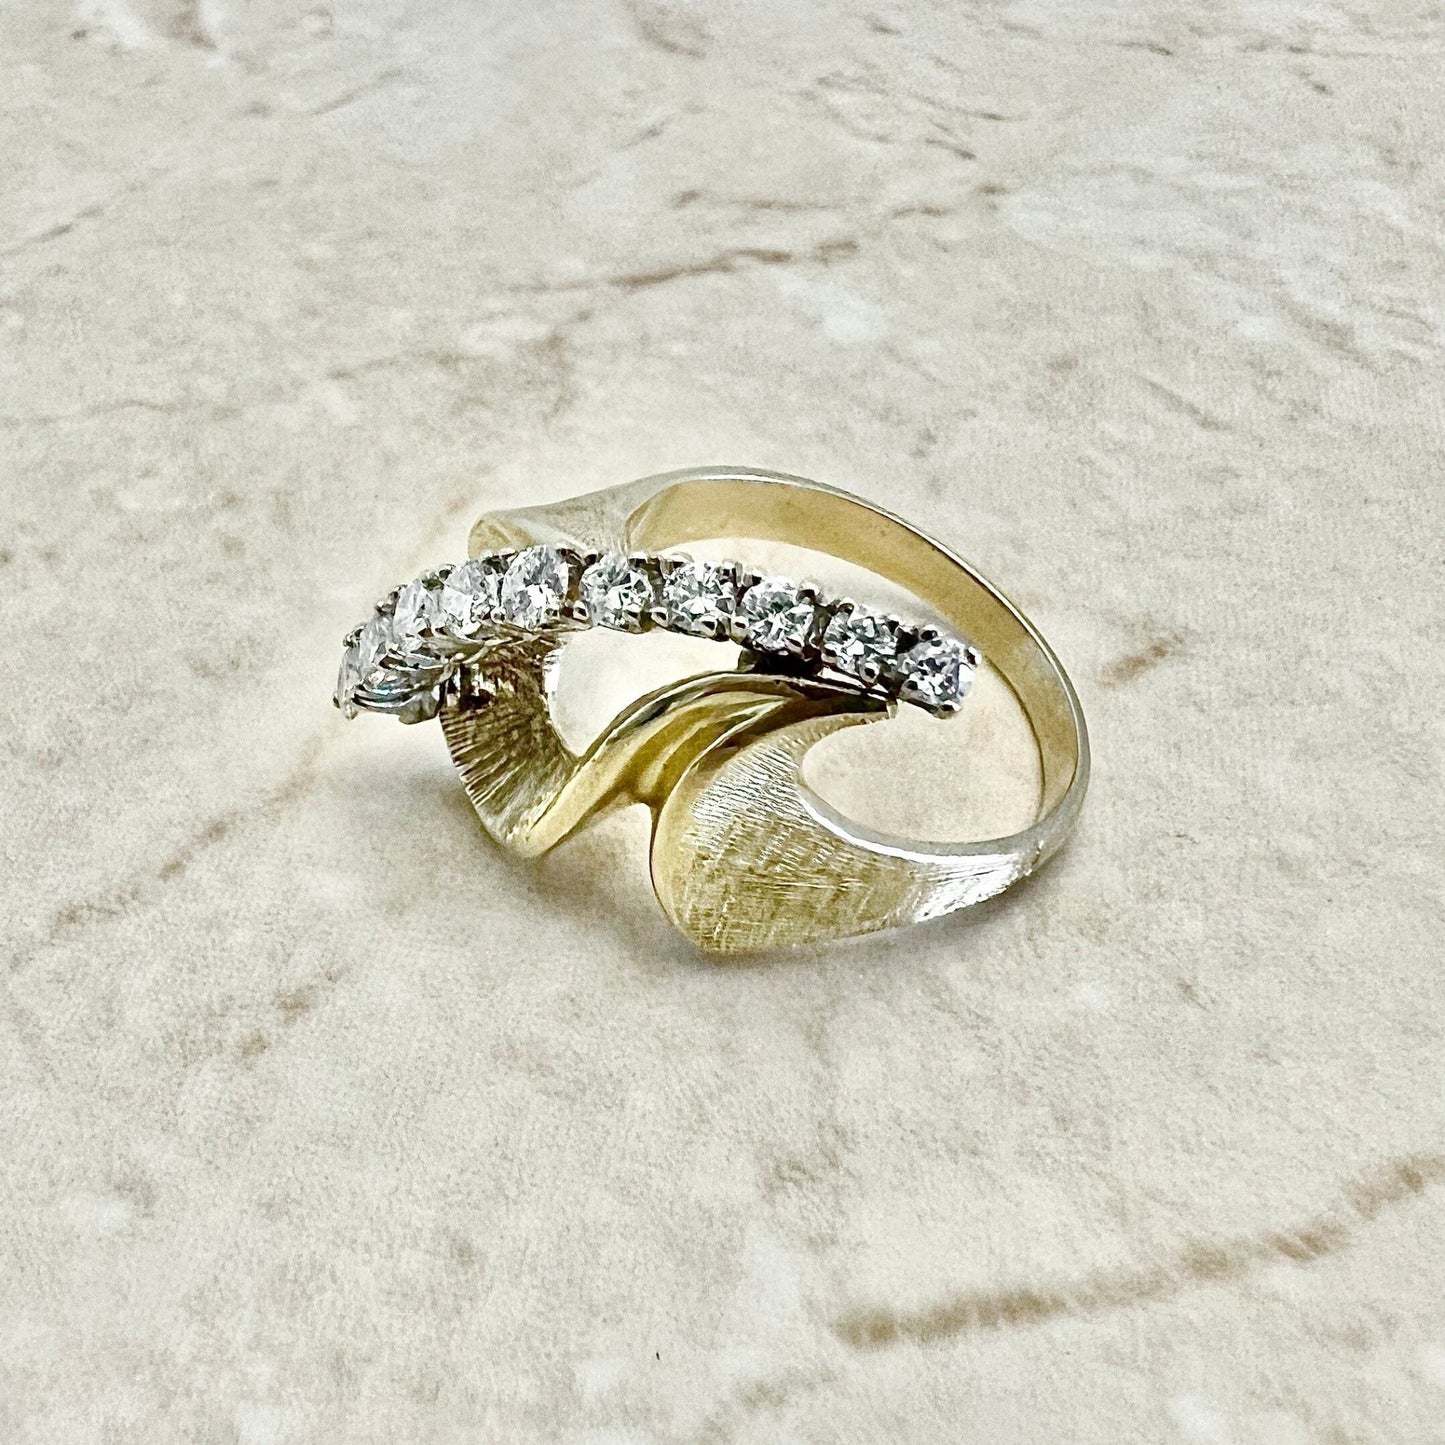 Fine Vintage 14K Diamond Cocktail Ring - Gold Graduated Diamond Ring - Two Tone Yellow & White Gold - Birthday Gift For Her - Best Gift